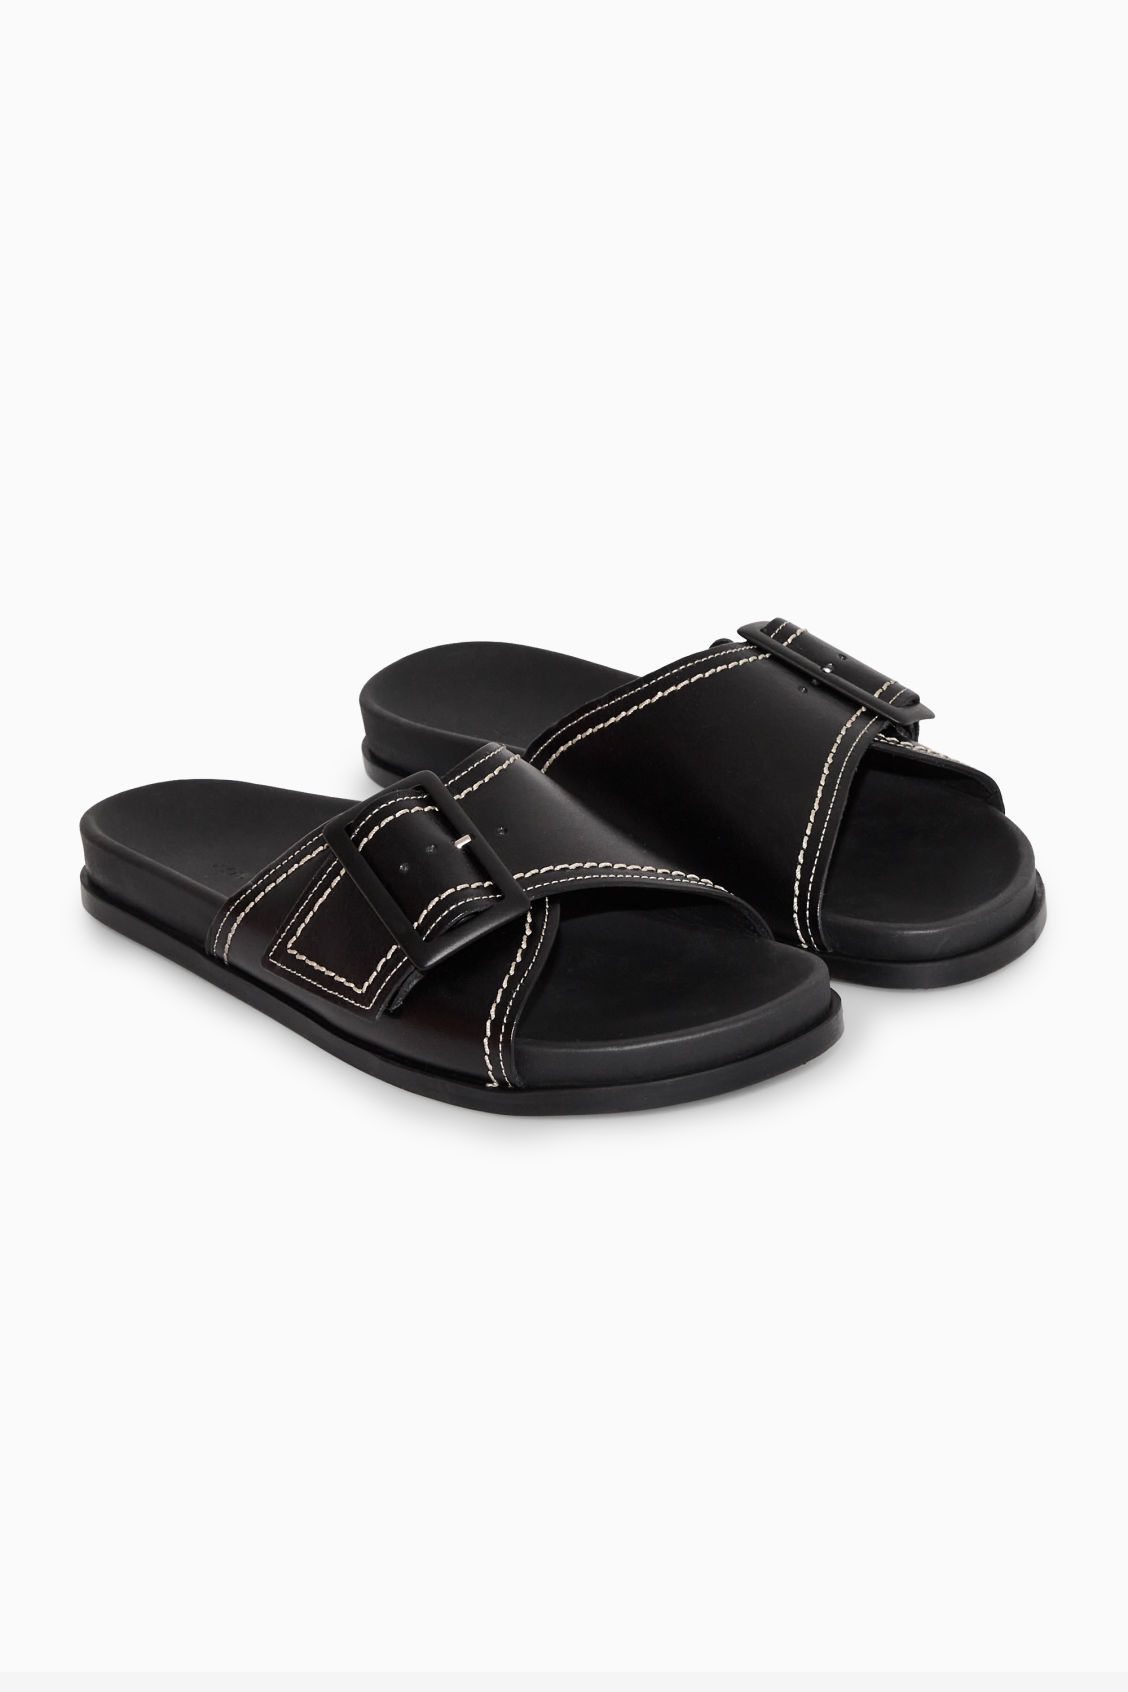 CONTRAST-STITCH BUCKLED LEATHER SLIDES - BLACK / WHITE - COS | COS UK